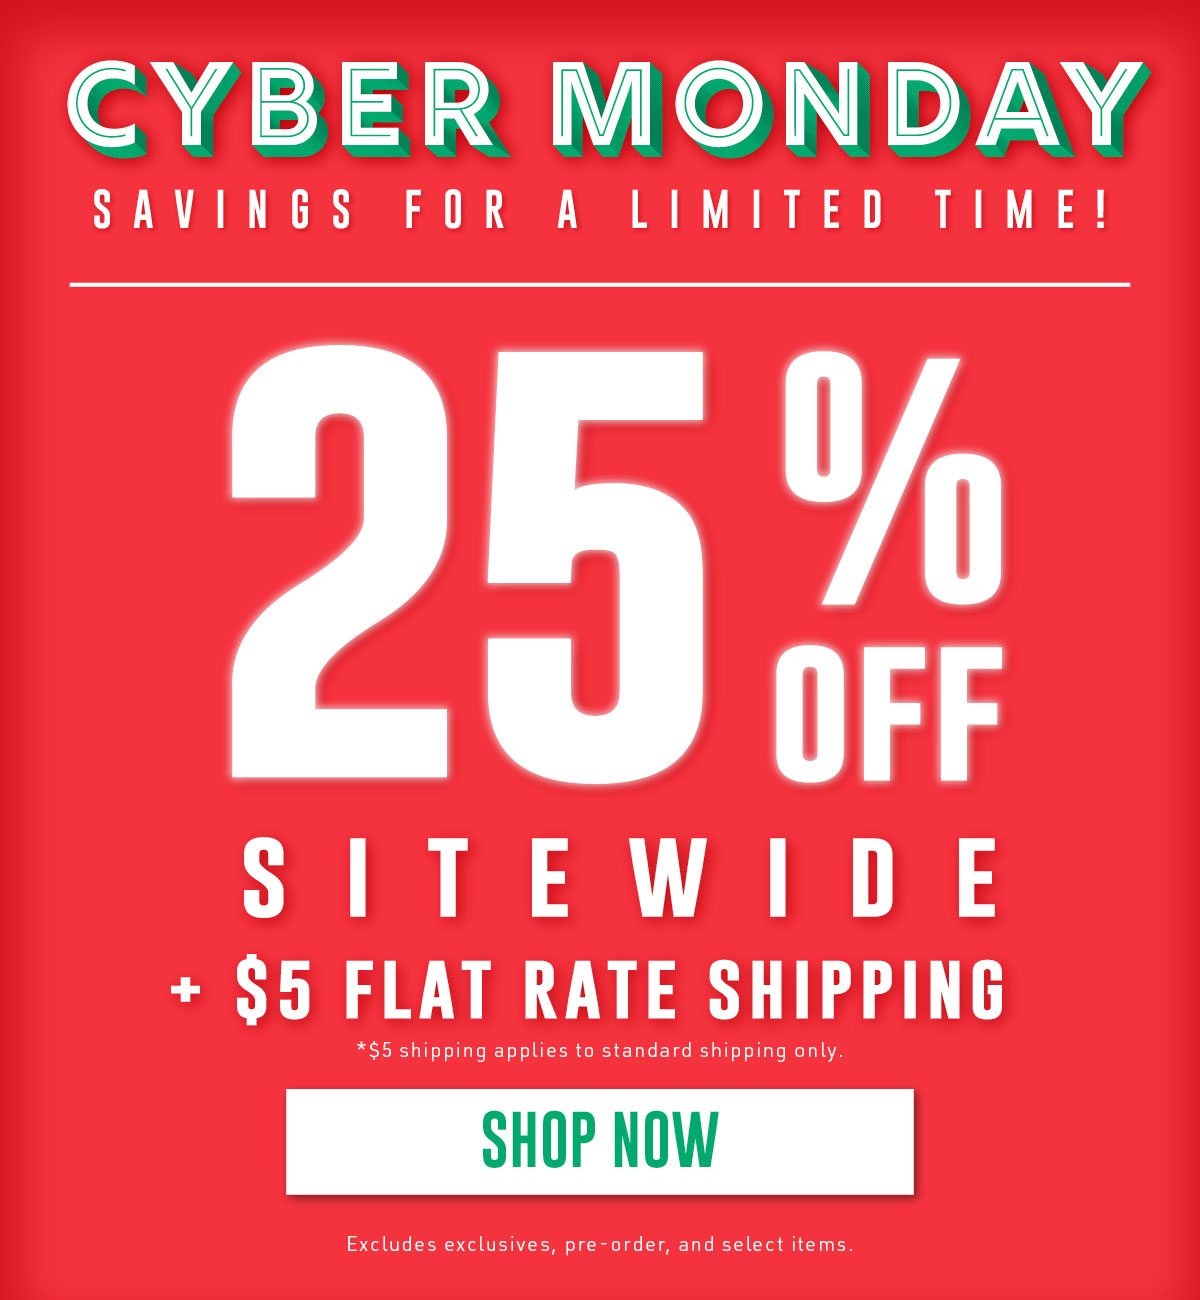 25% Off Sitewide + Flat Rate Shipping - Shop Now